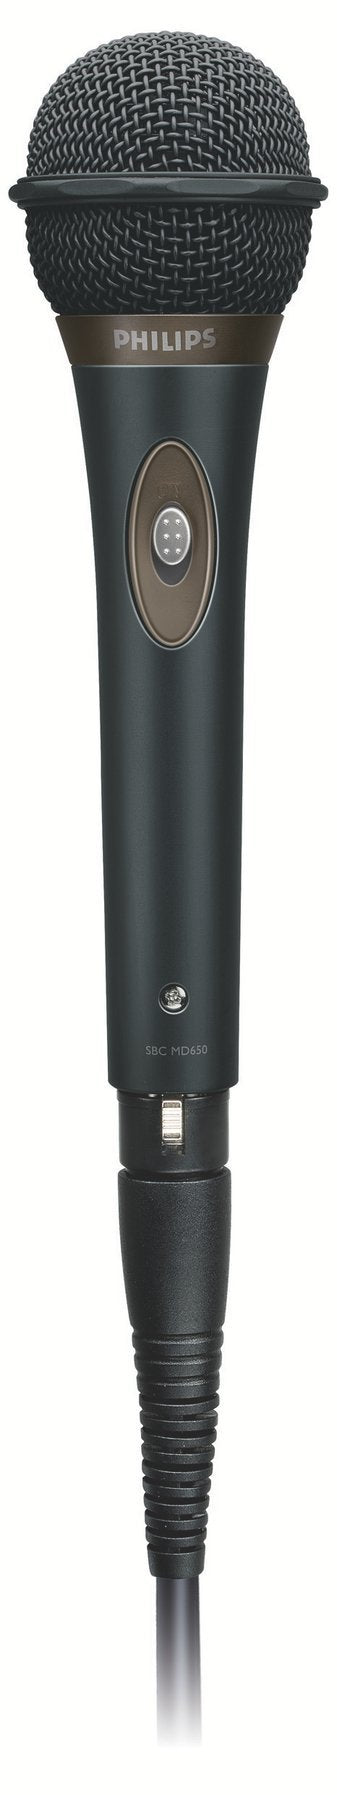 Philips SBCMD650/00 - Corded Microphone